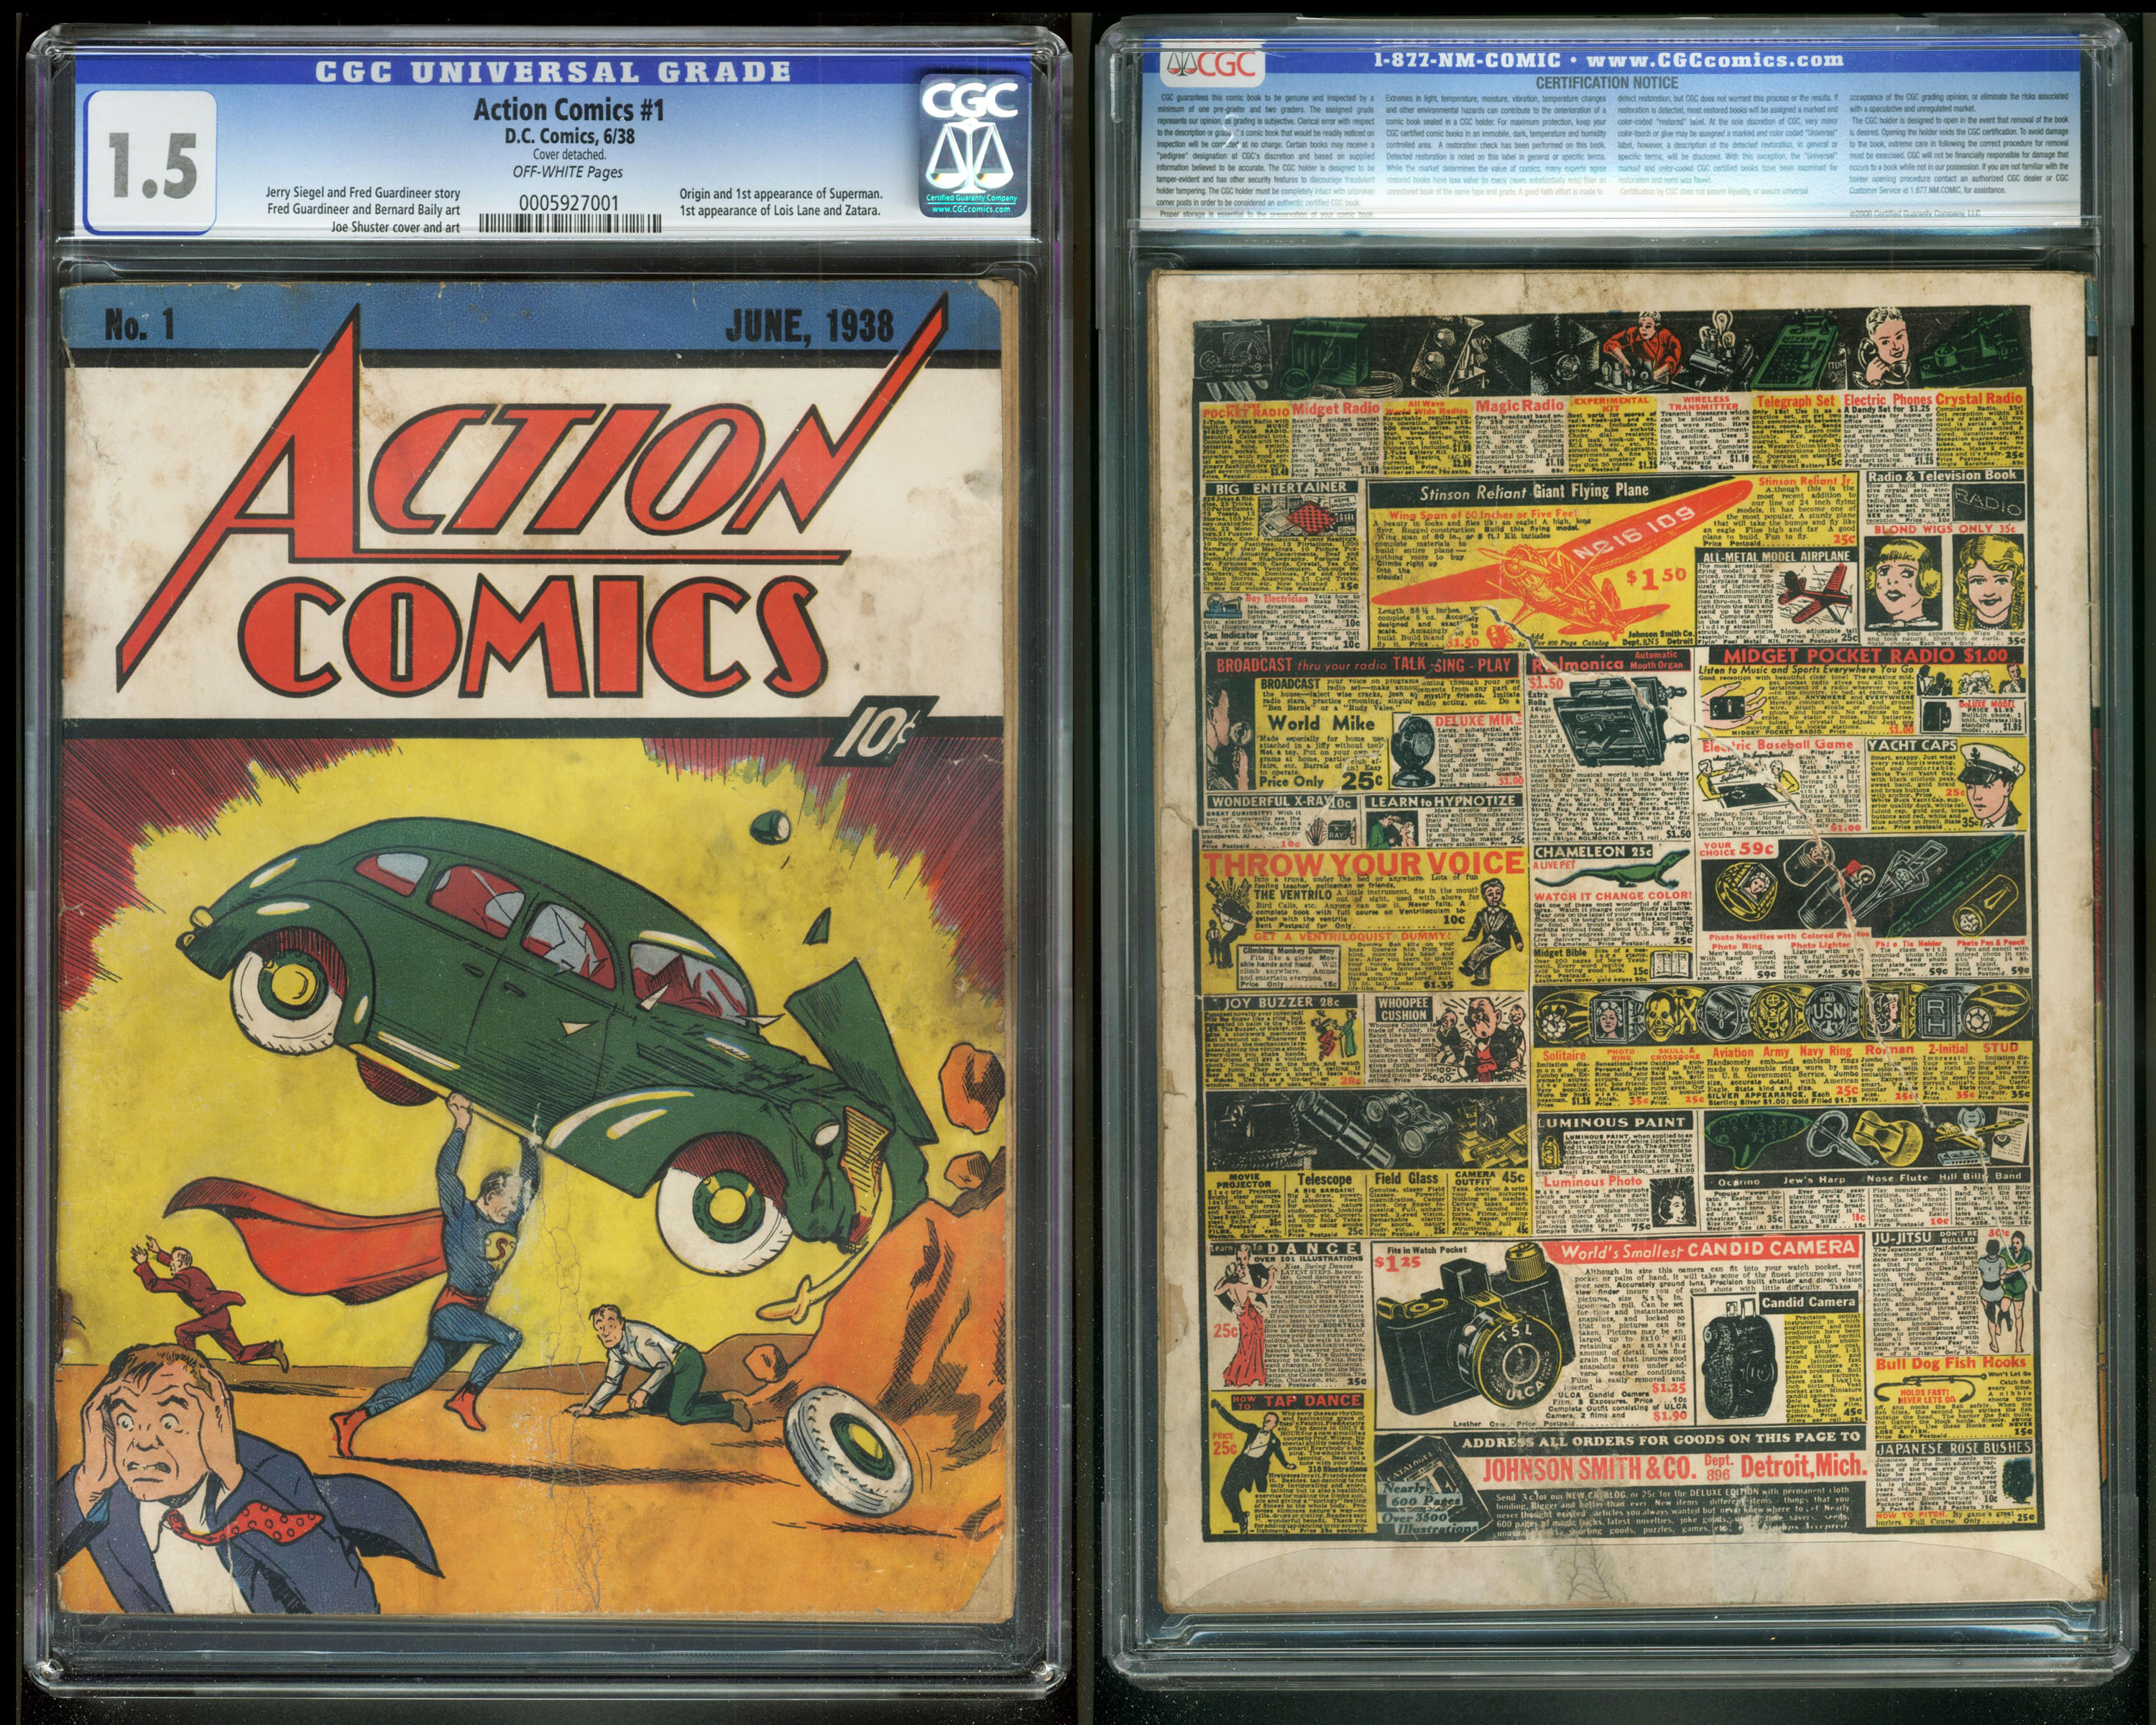 Rare Superman comic book sells for $175,000 - The Blade